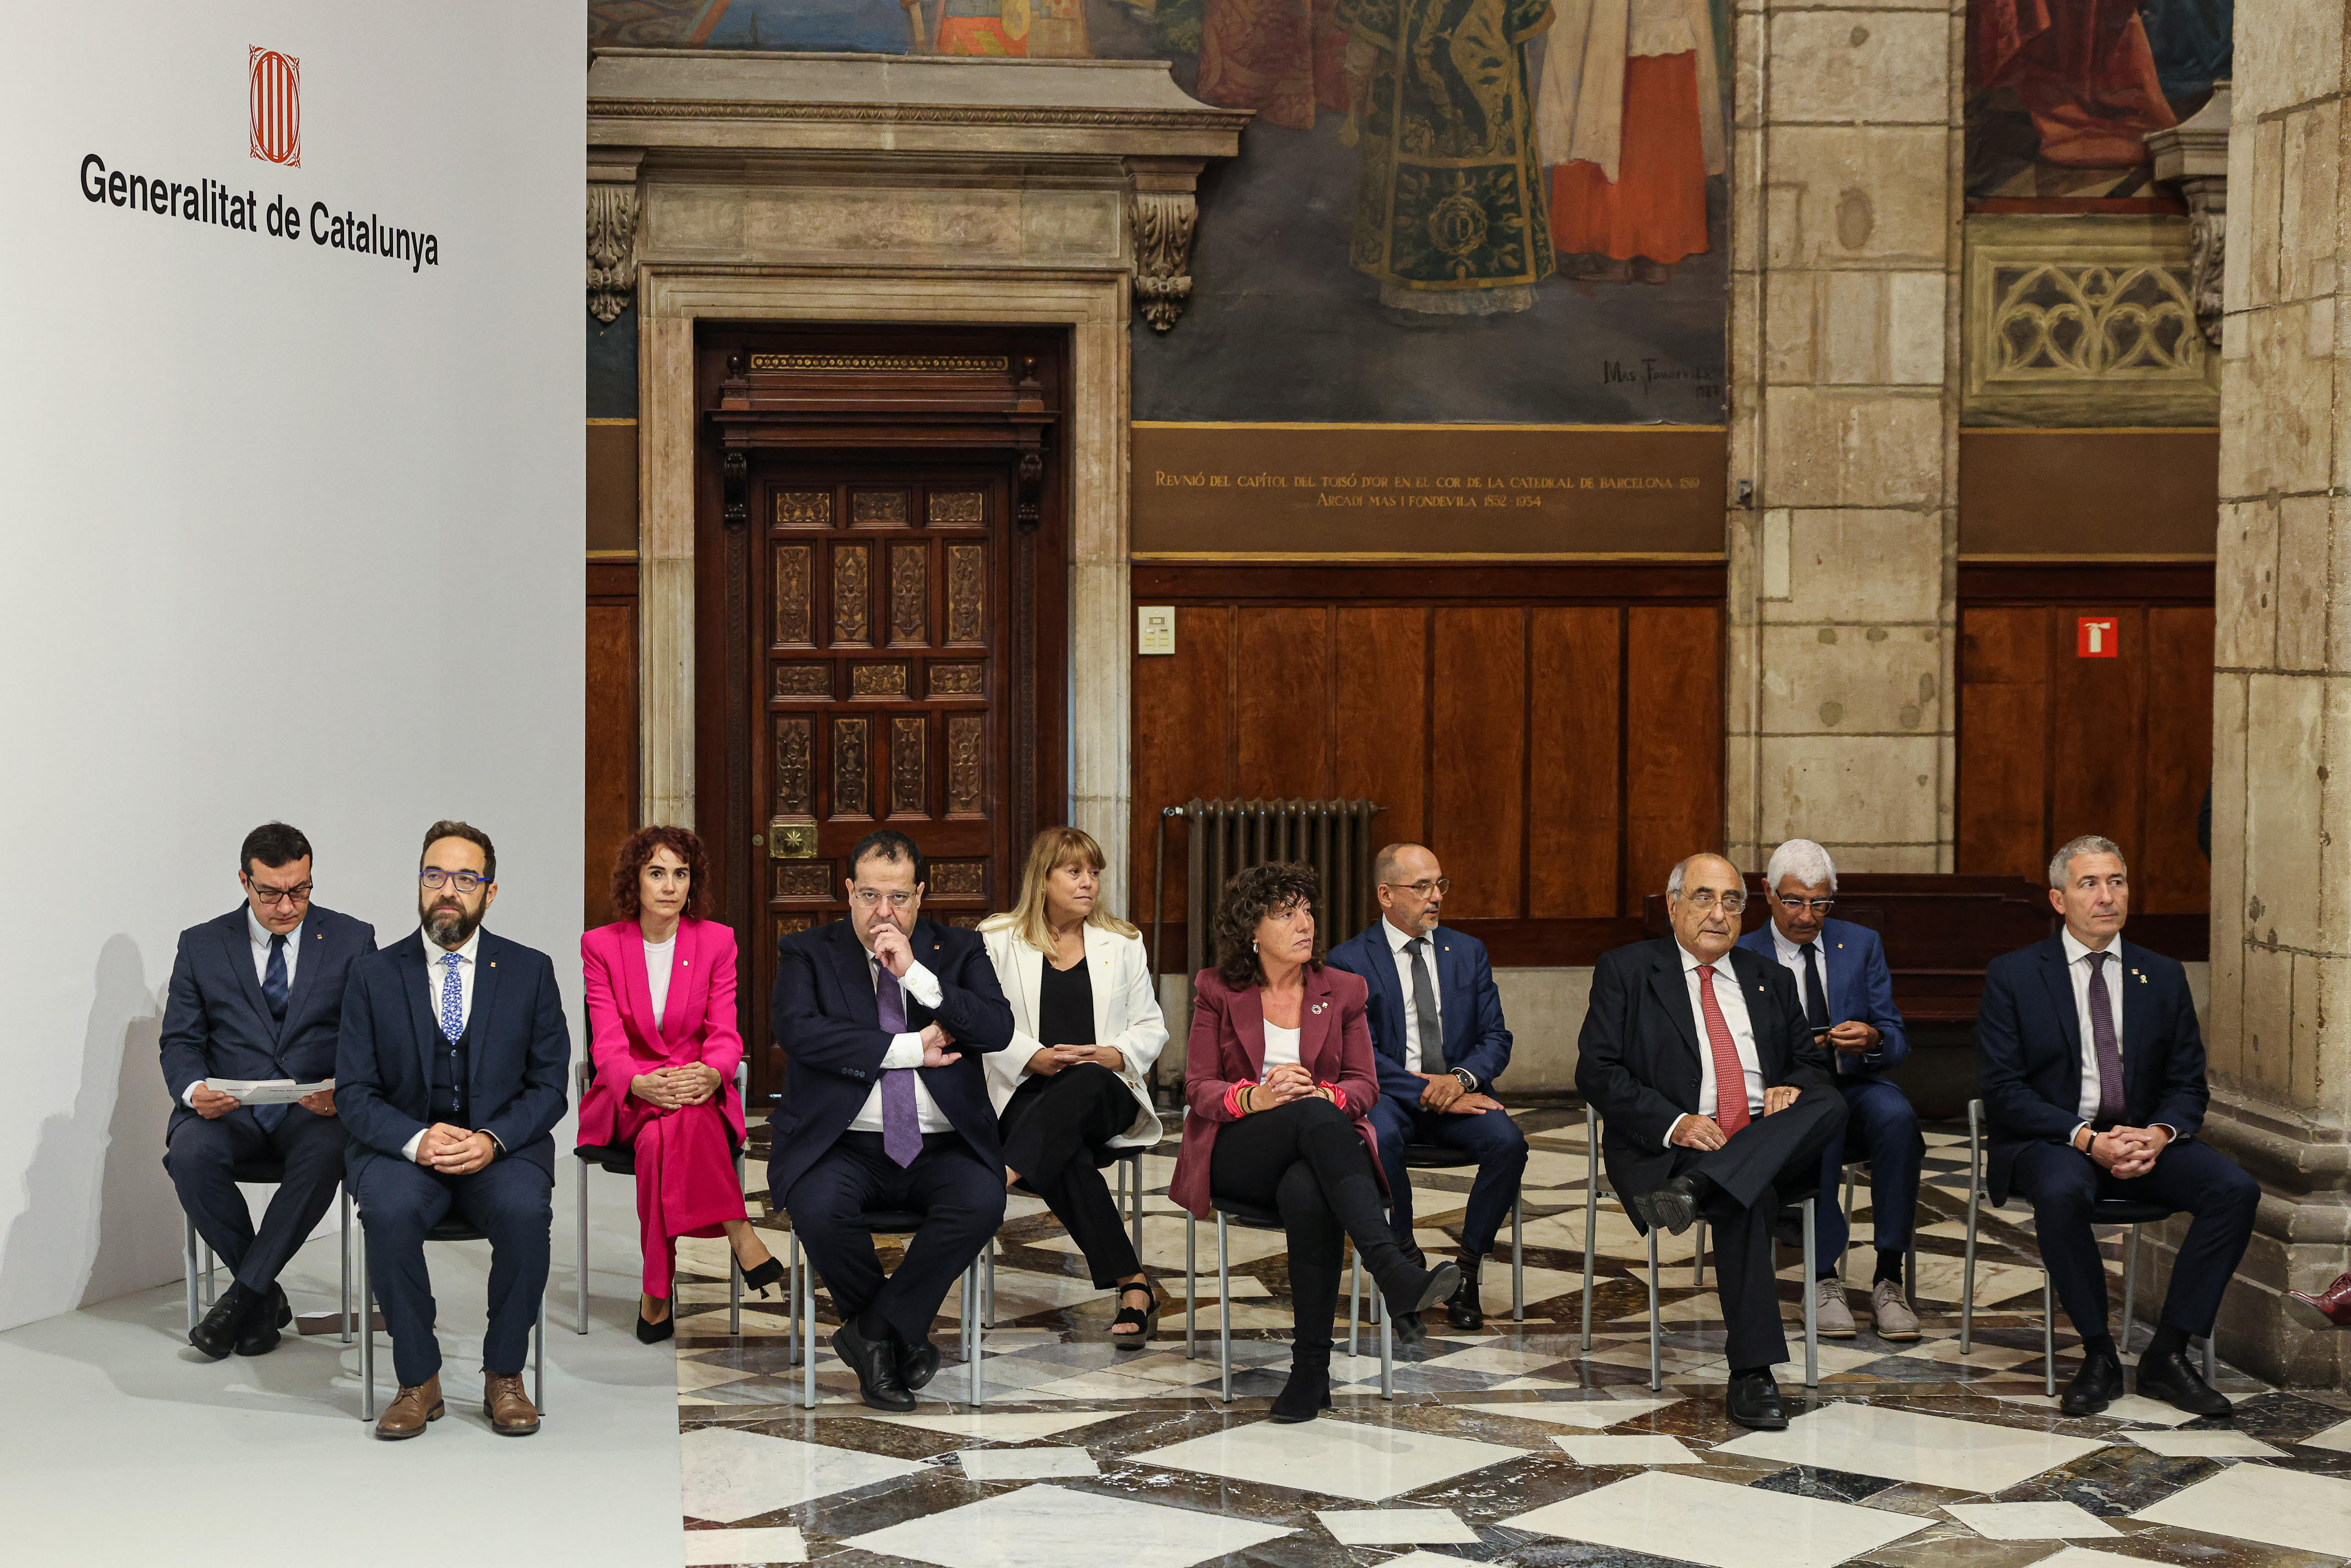 Ministers of the first solo government of Esquerra Republicana de Catalunya since 1934 during the appointing ceremony on October 11, 2022